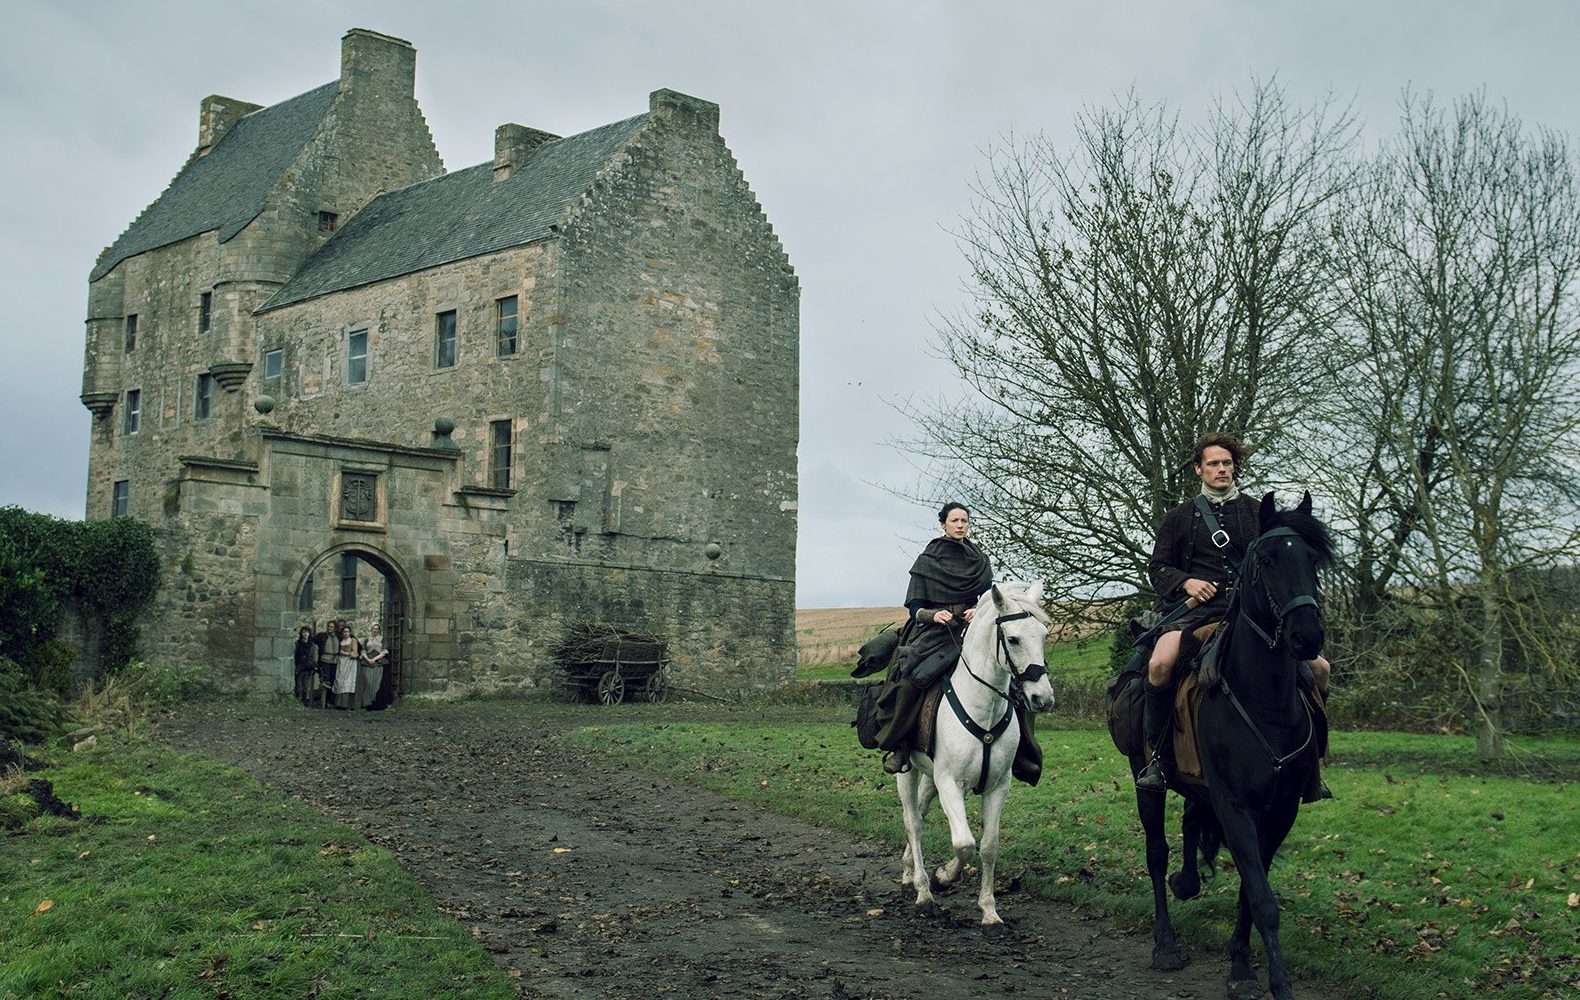 Lallybroch castle is one of the main tourism hotspots in Scotland fuelled by Outlander.